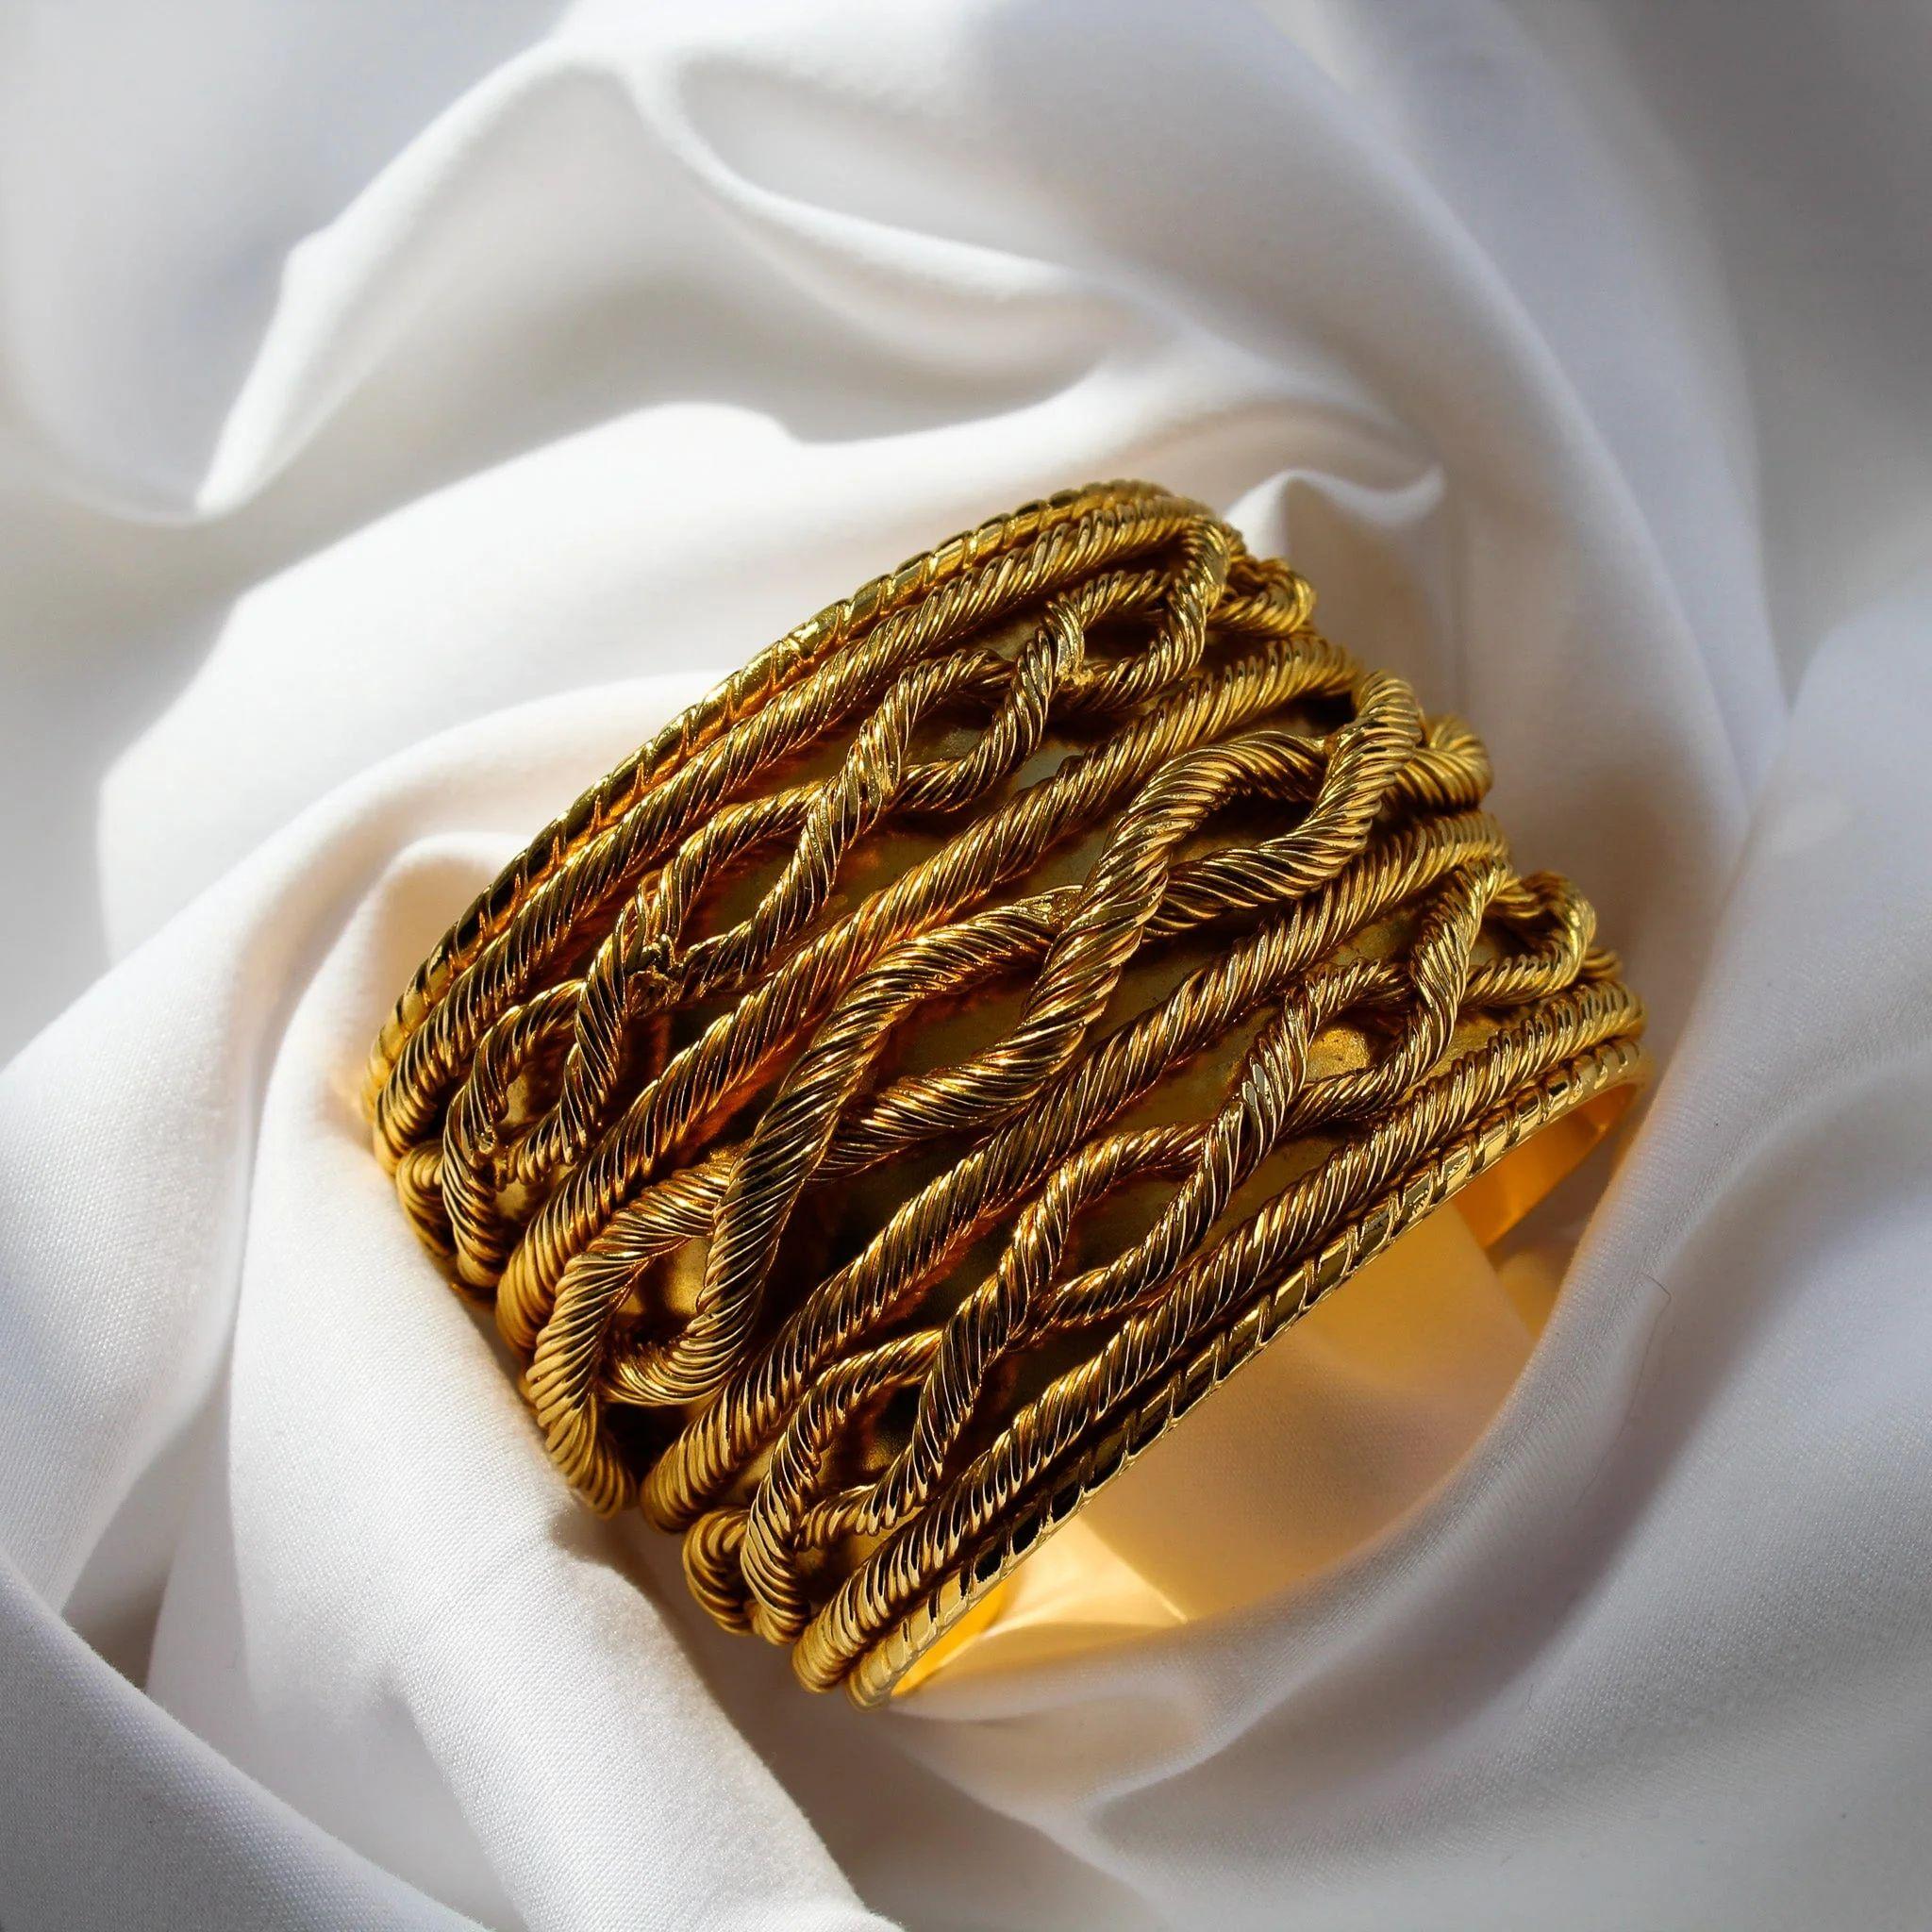 Vintage Chanel Cuff Bracelet 1980s

A beautiful Chanel bracelet, crafted in France in 1986. This incredible vintage Chanel Cuff without the typical CC logo it exudes stealth luxury!  

This Chanel vintage bracelet is in excellent condition and